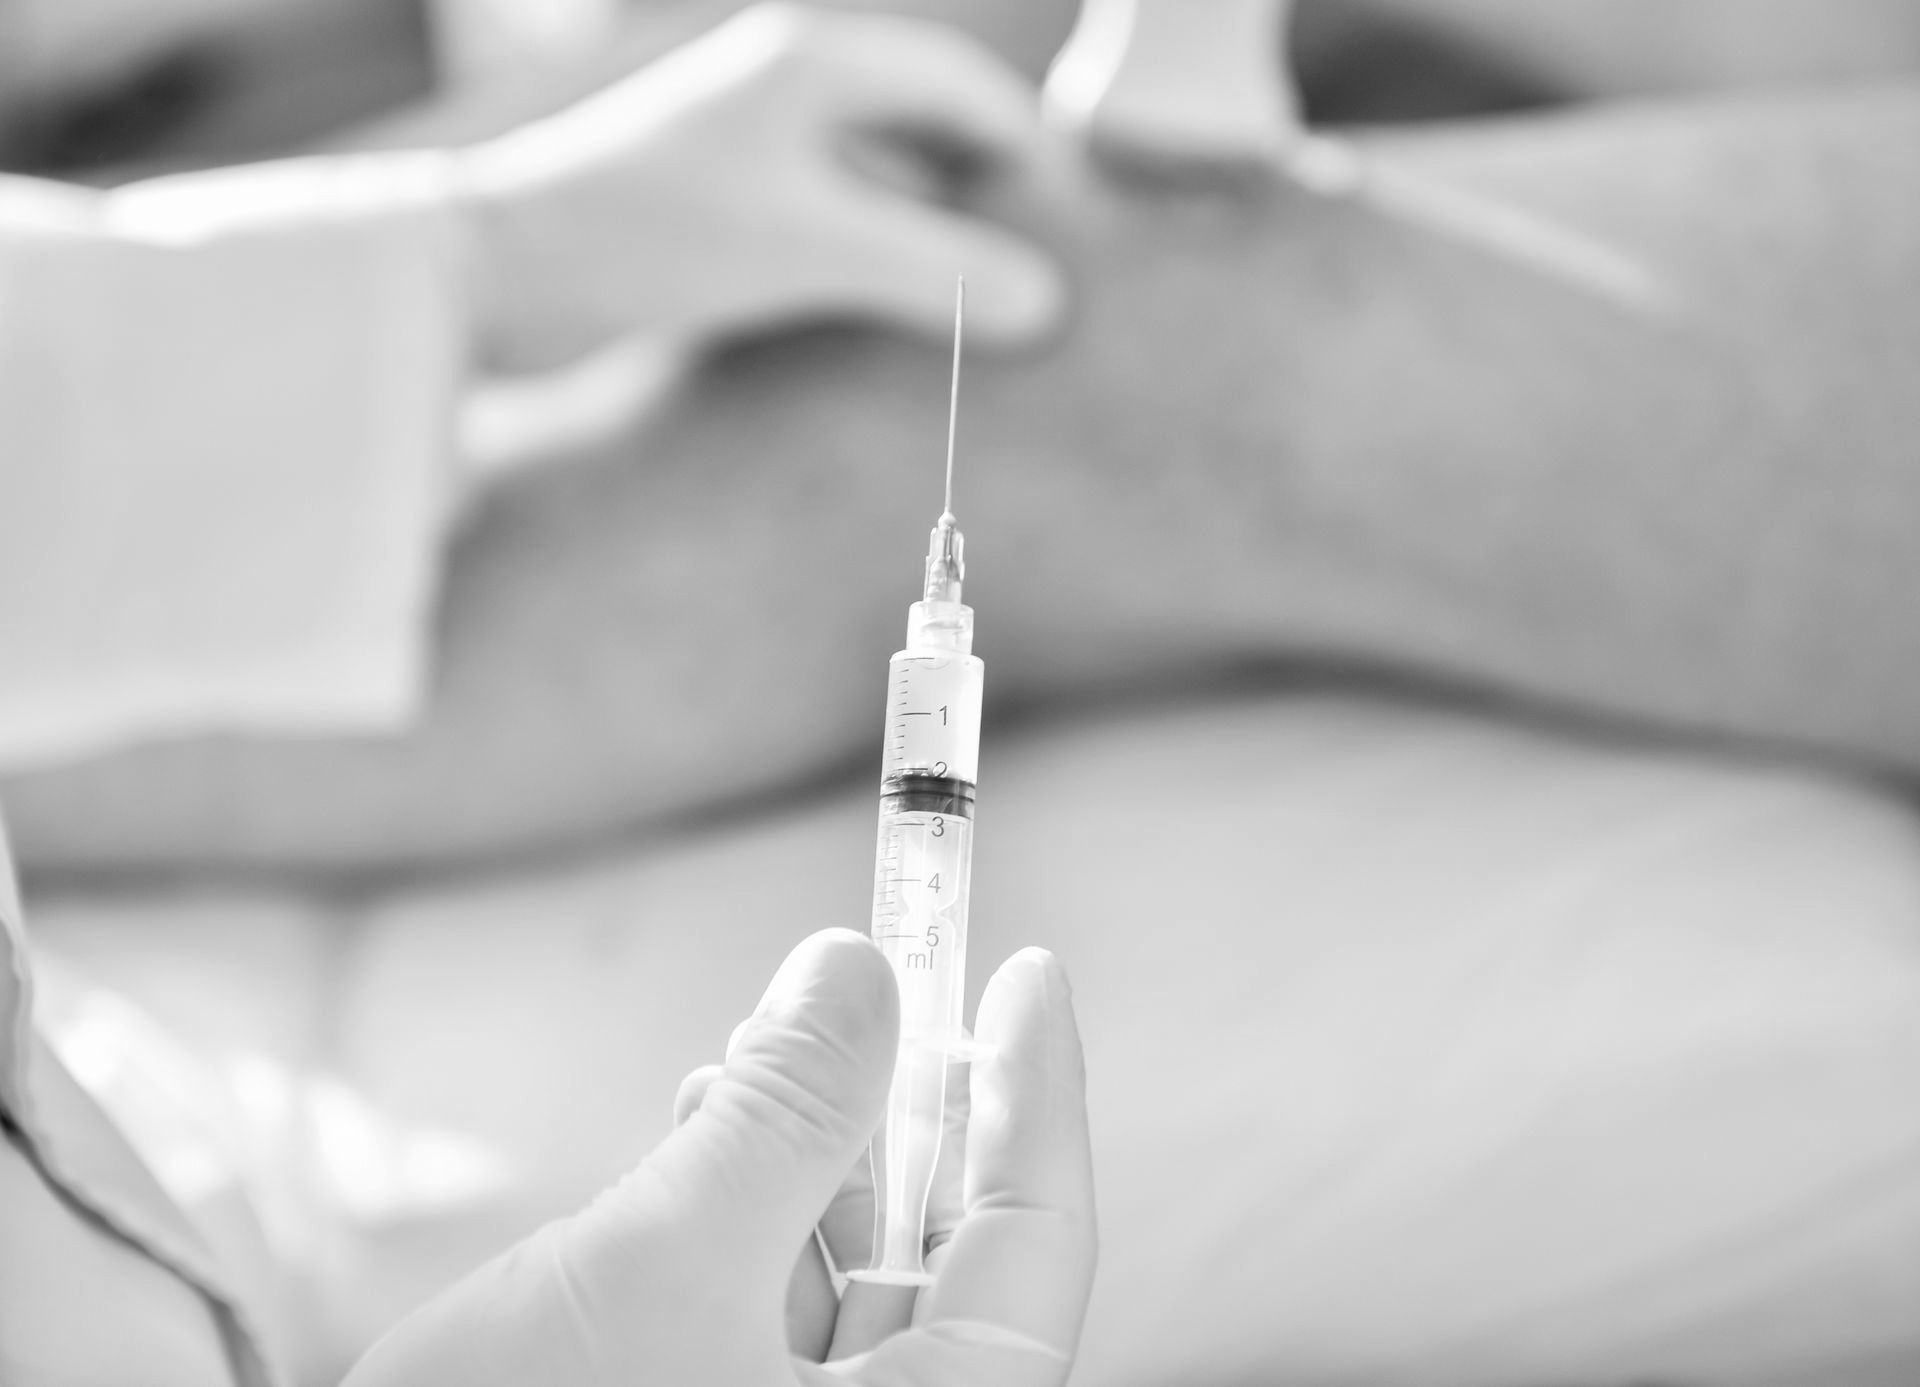 A person is holding a syringe in their hand in a black and white photo.